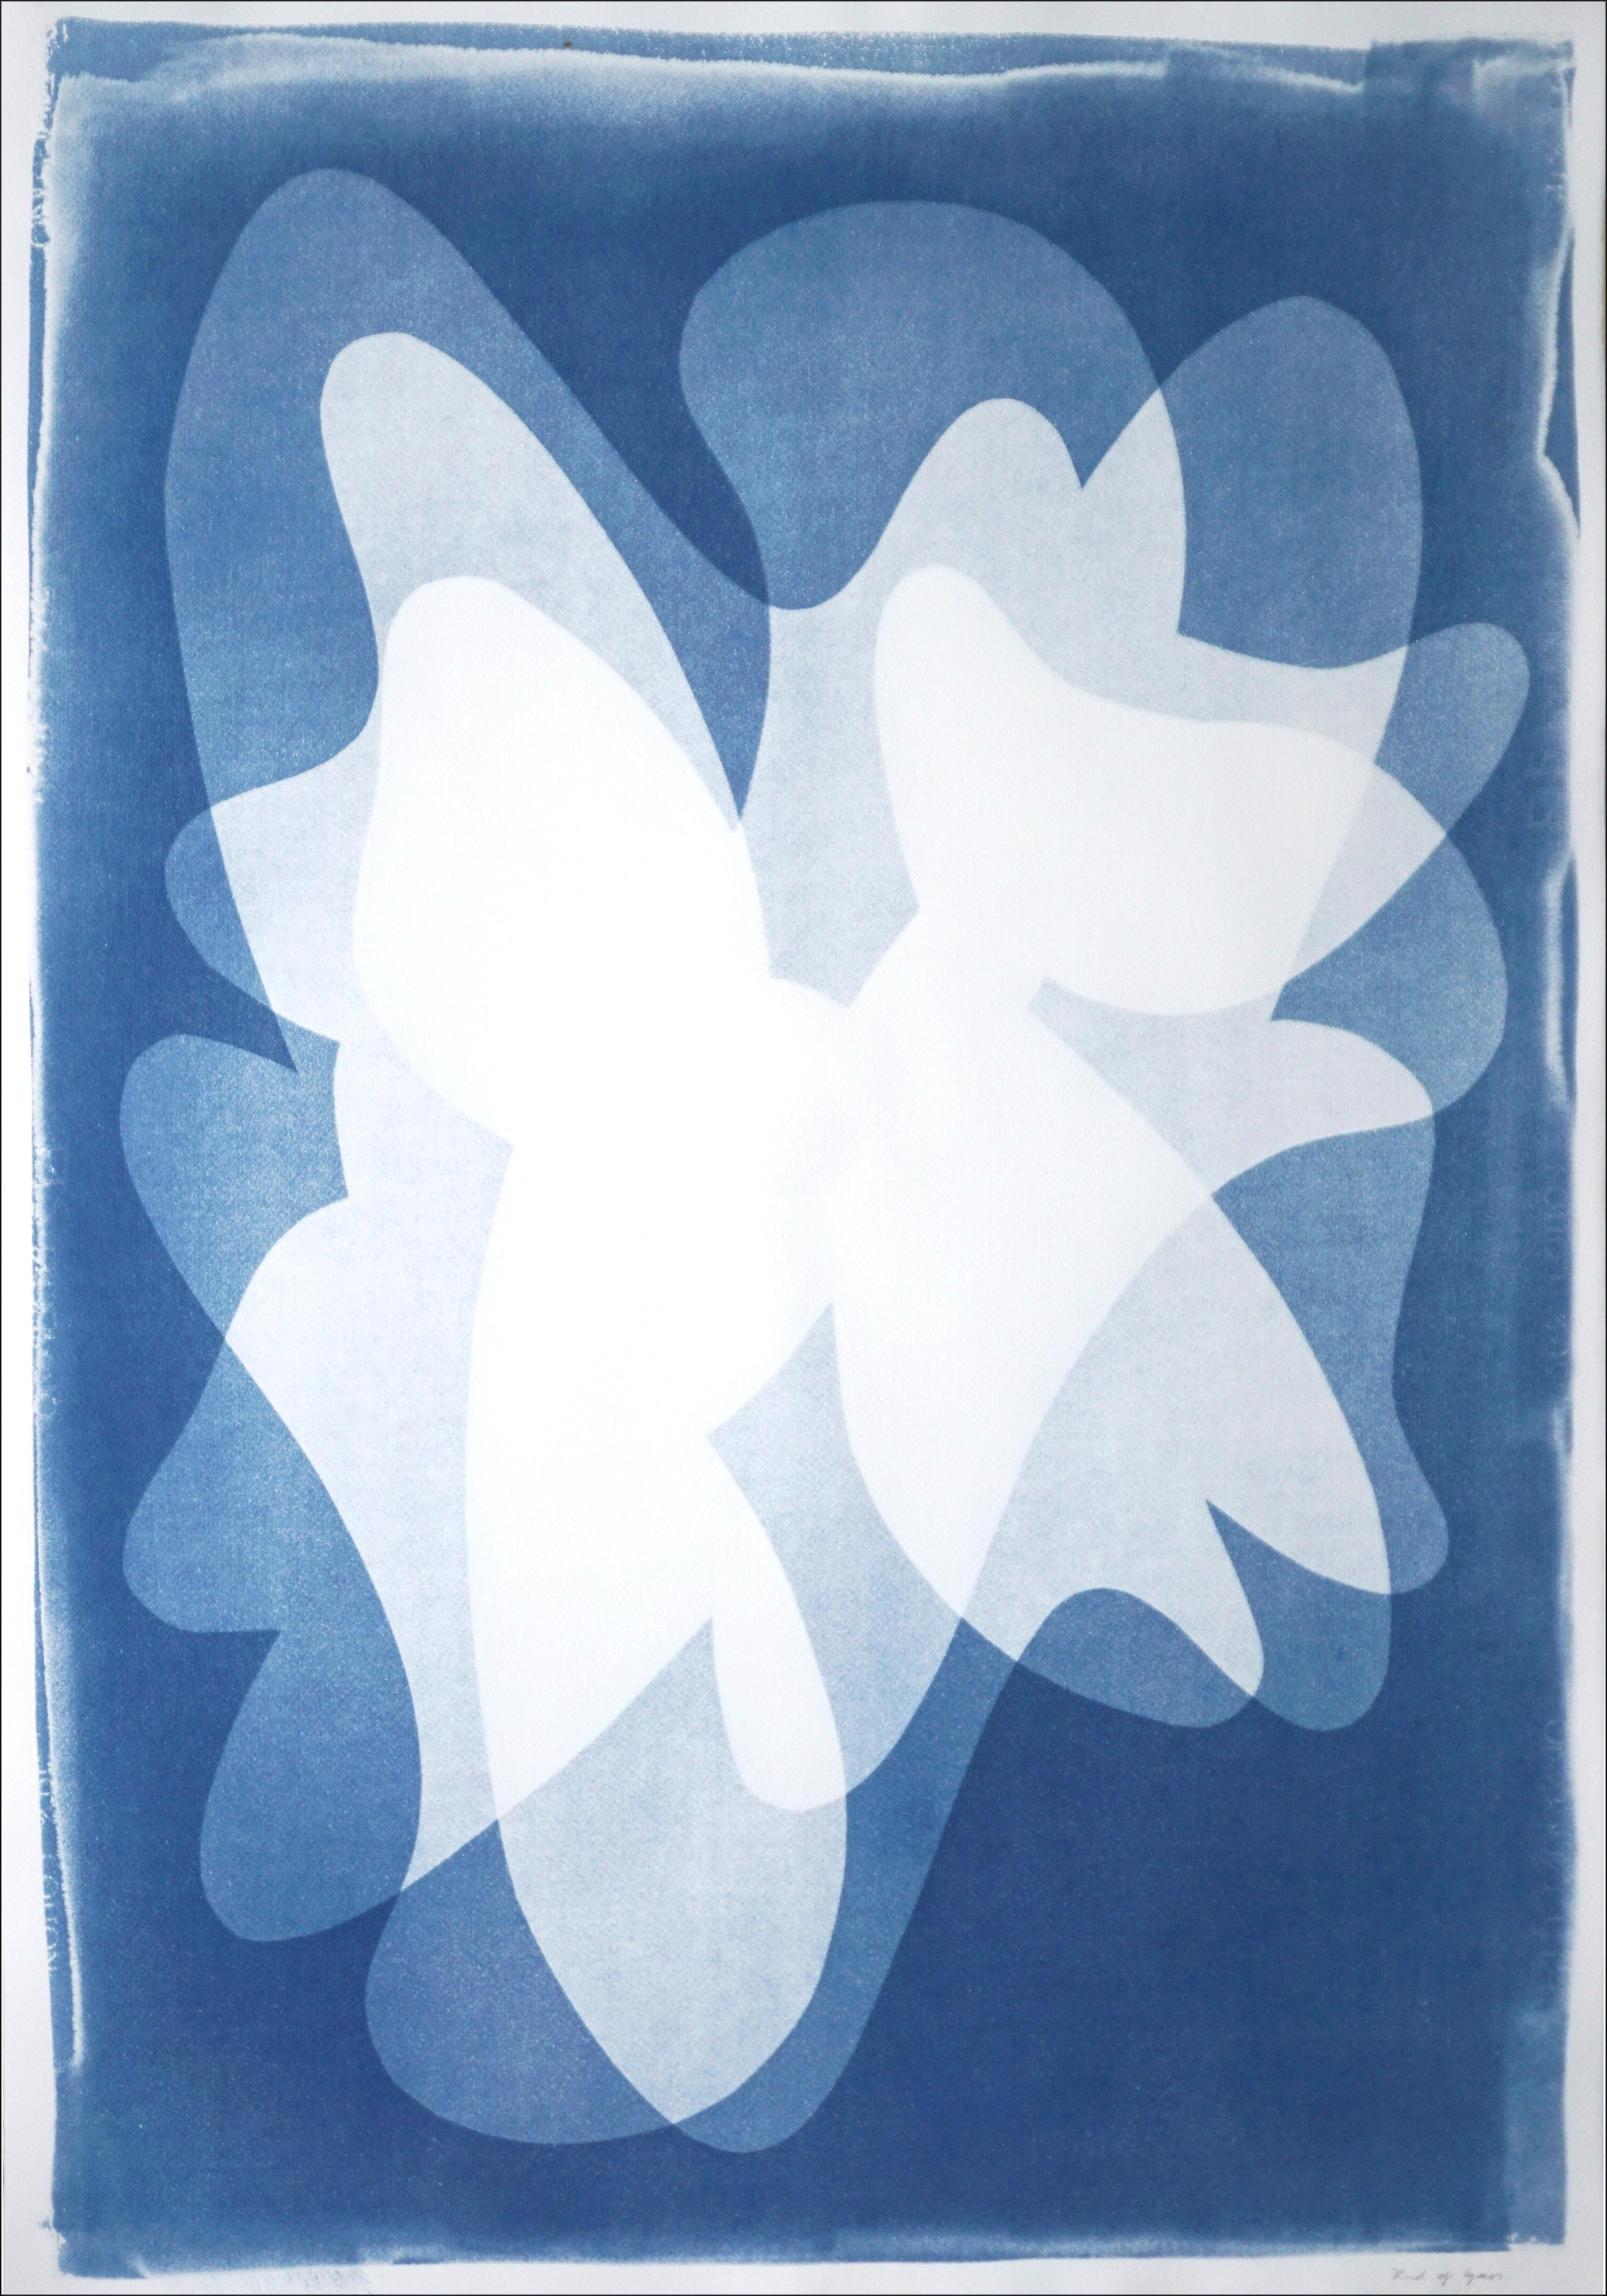 Kind of Cyan Abstract Print - Blue Abstract Tulips, Vertical Flowers Shadows Blue & White, Handmade Botanical